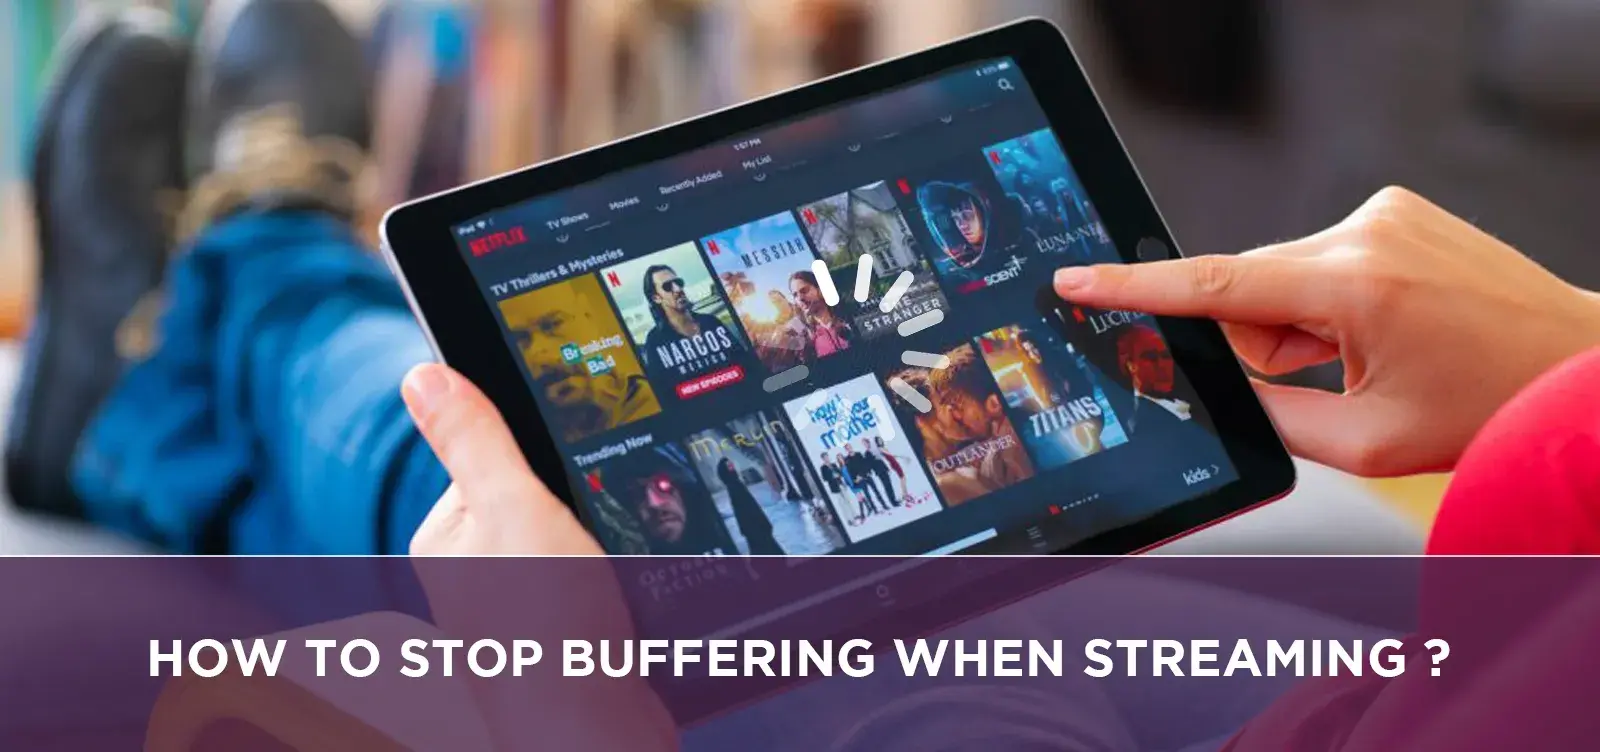 How to Stop Buffering When Streaming?